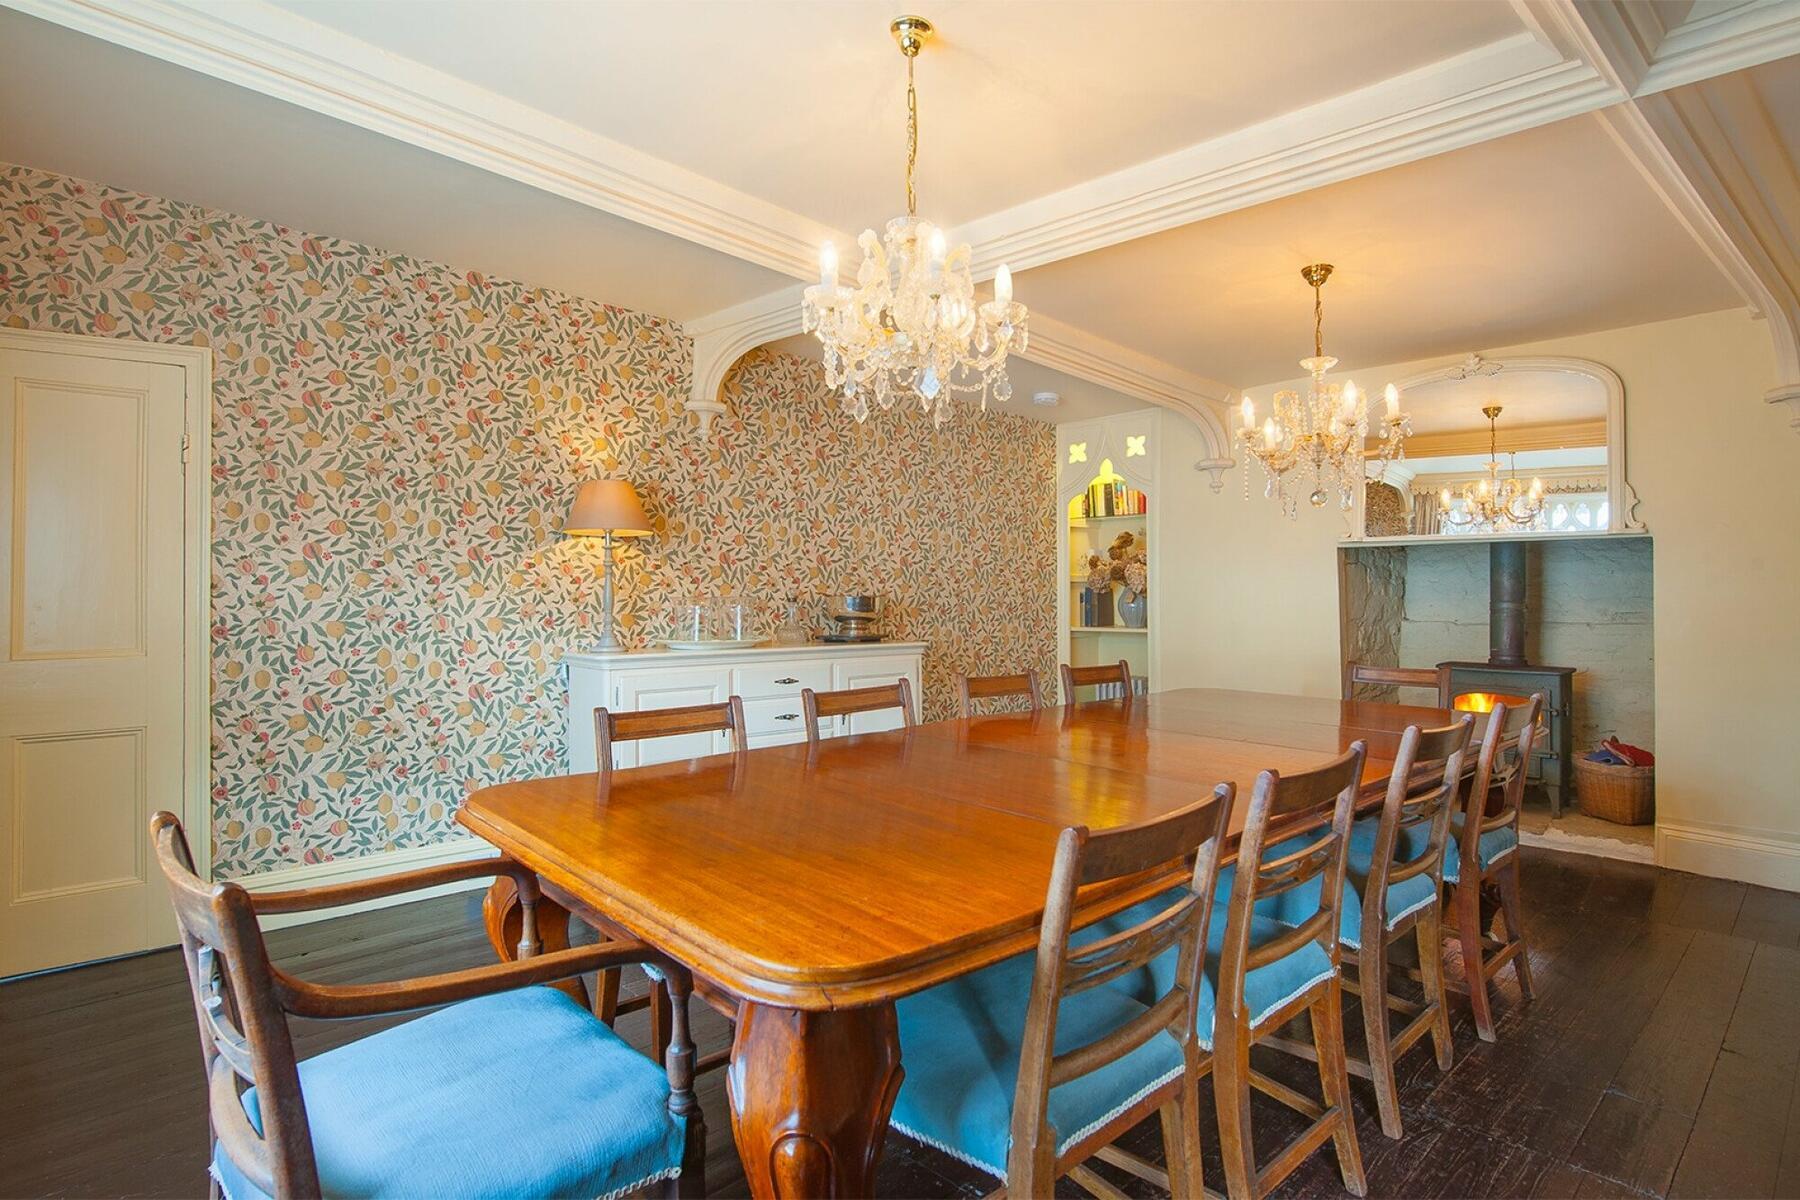 The dining room, a more formal space for eating